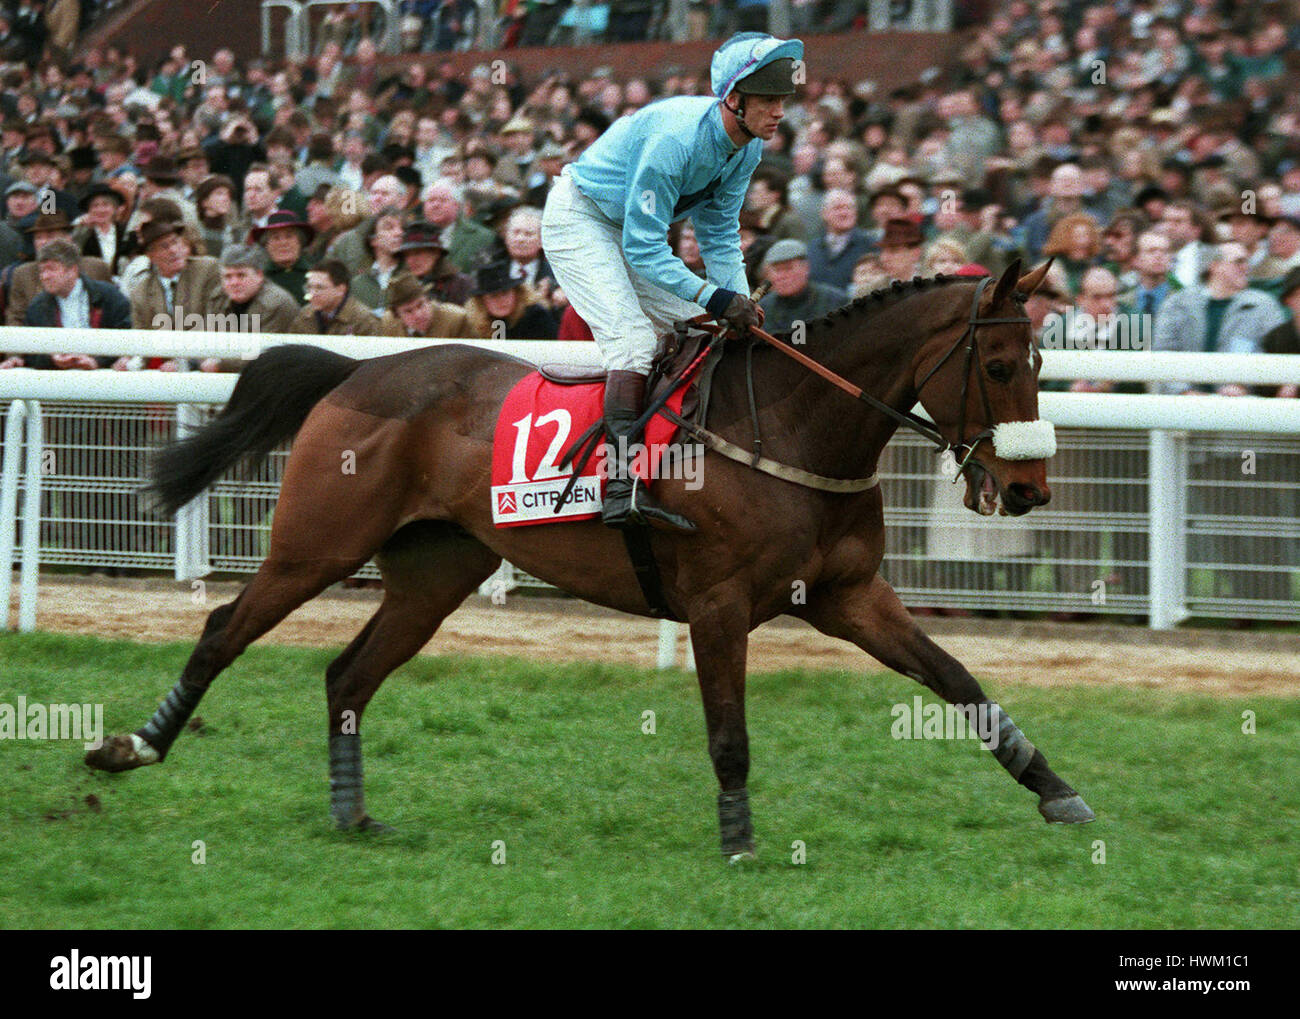 UNSINKABLE BOXER RIDDEN BY BRENDEN POWELL 20 March 1995 Stock Photo